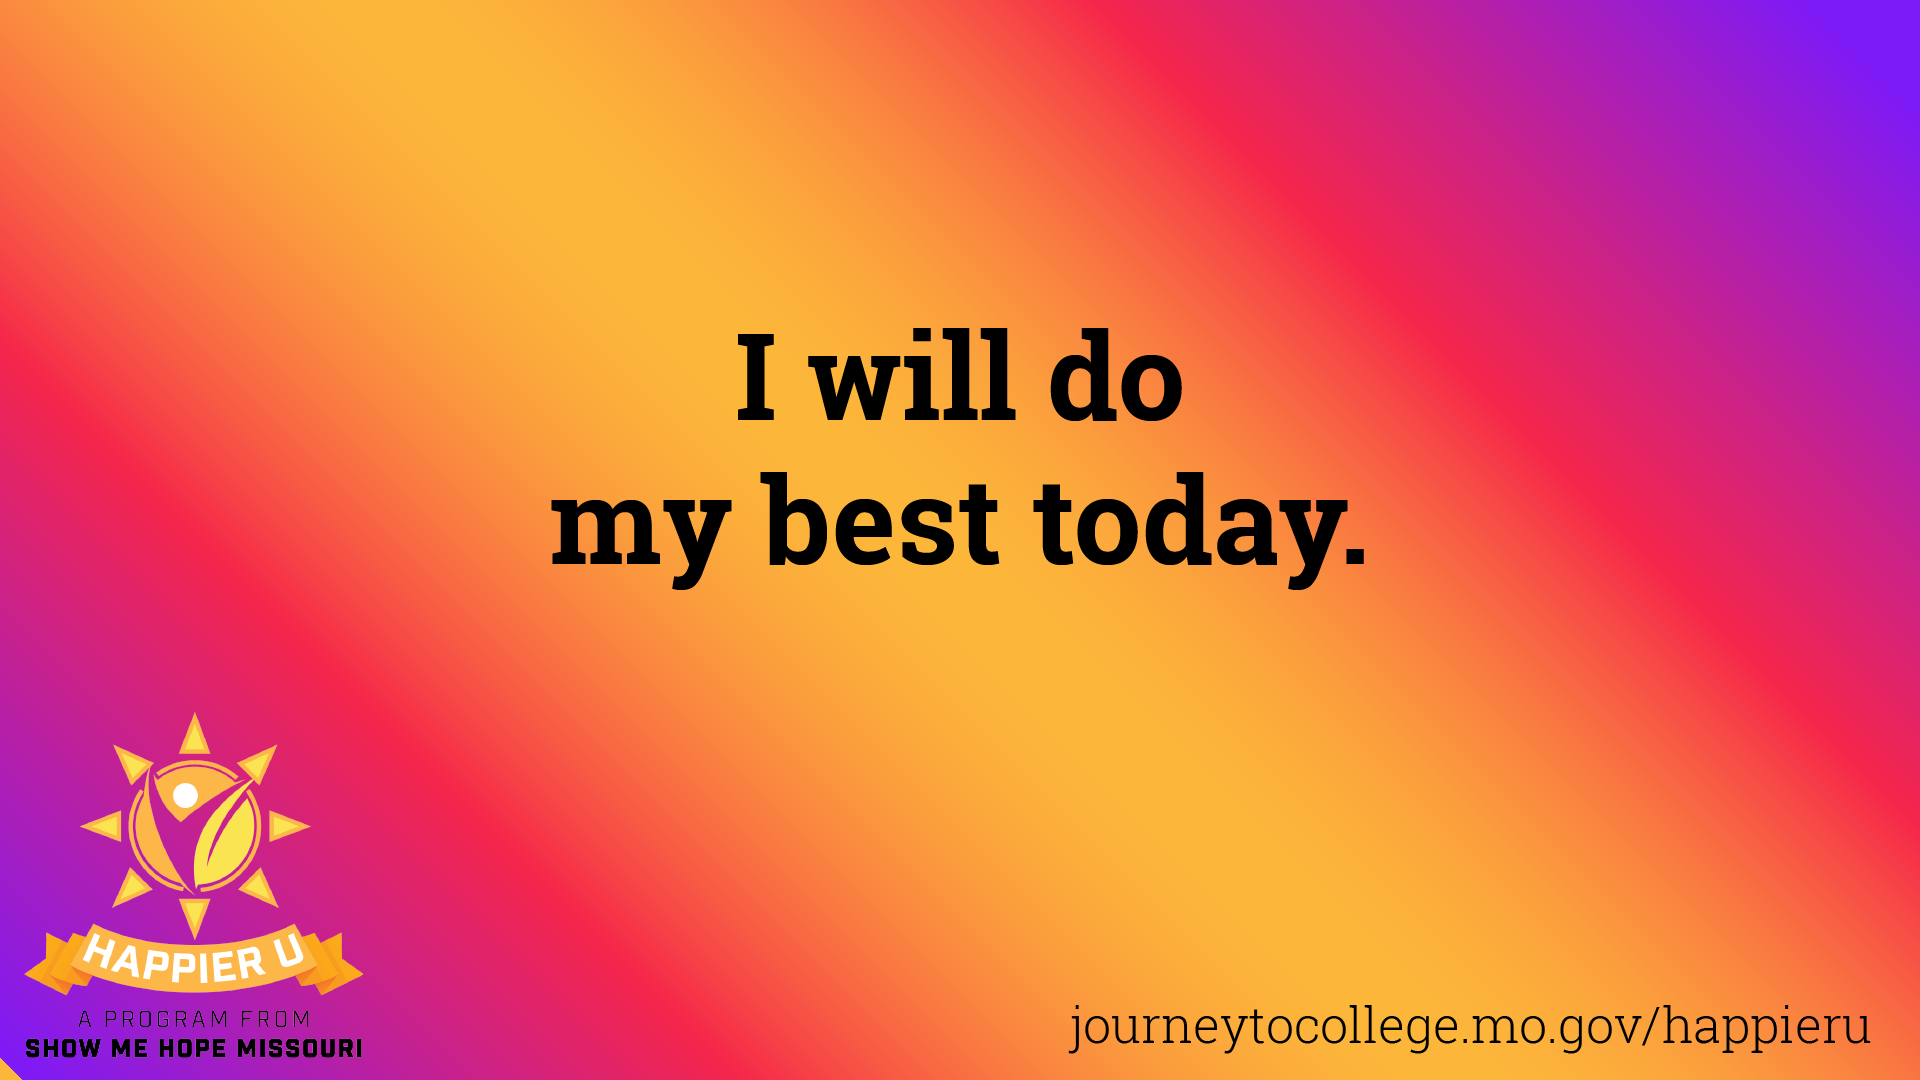 "I will do my best today"